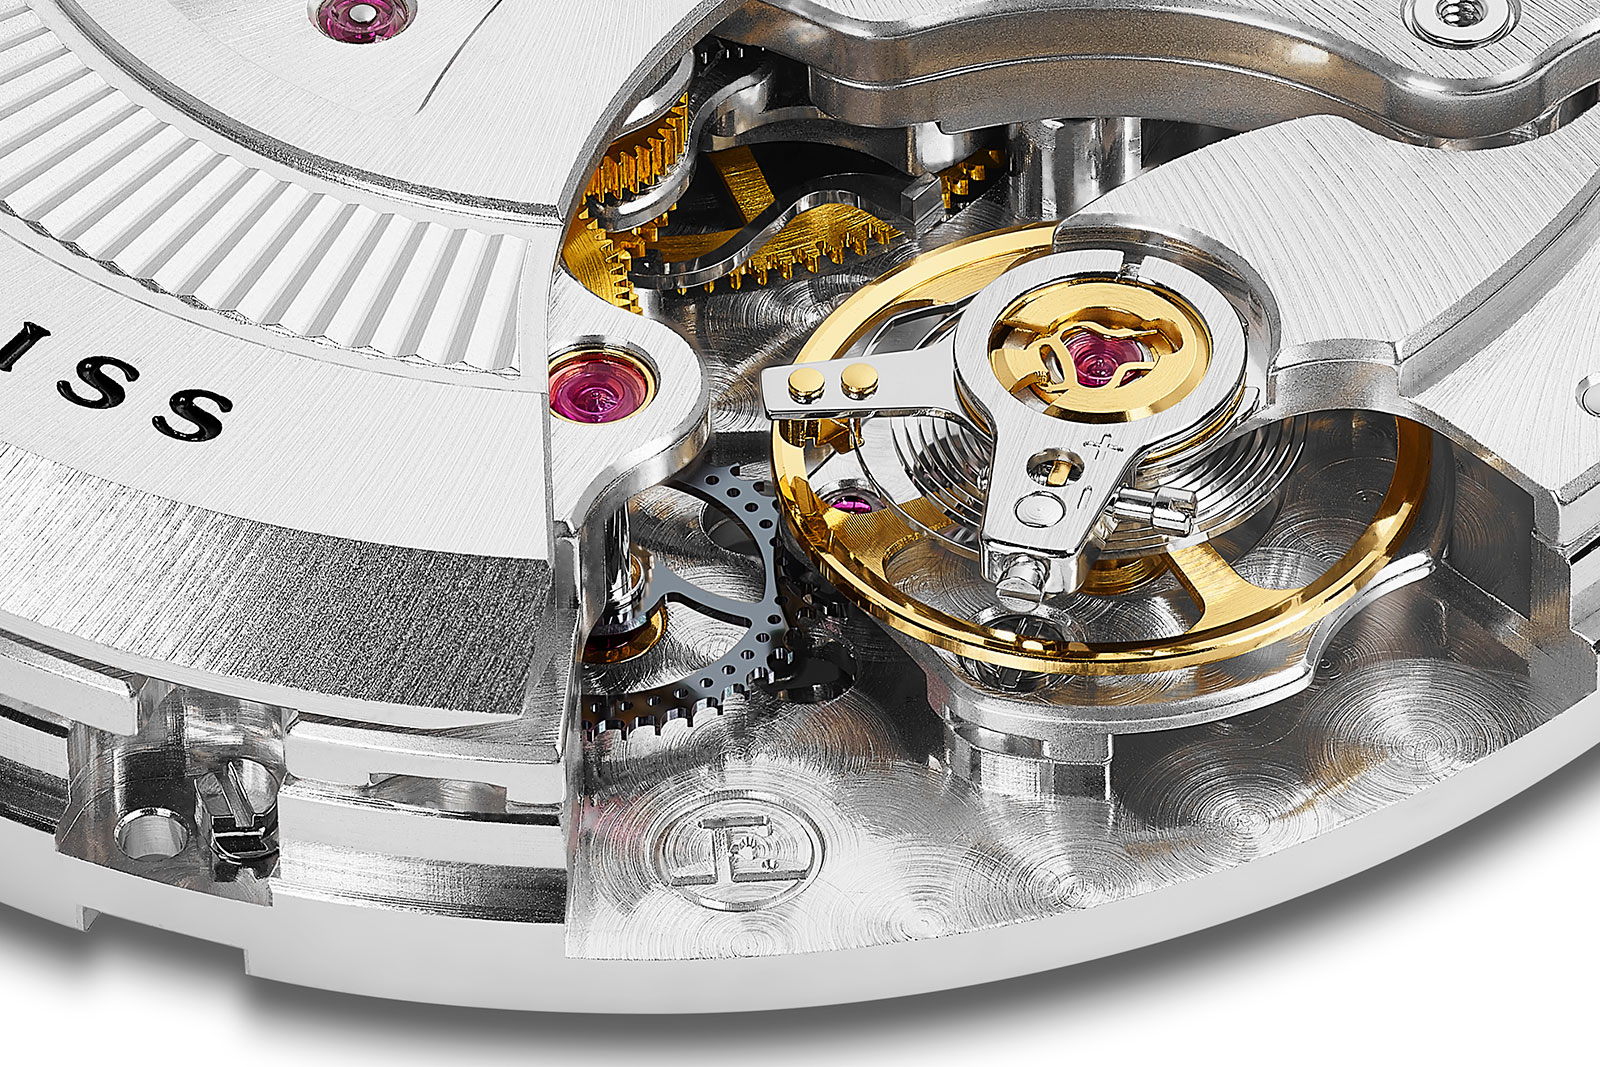 Chopard Alpine Eagle Cadence 8Hz Limited Edition for $17,645 for